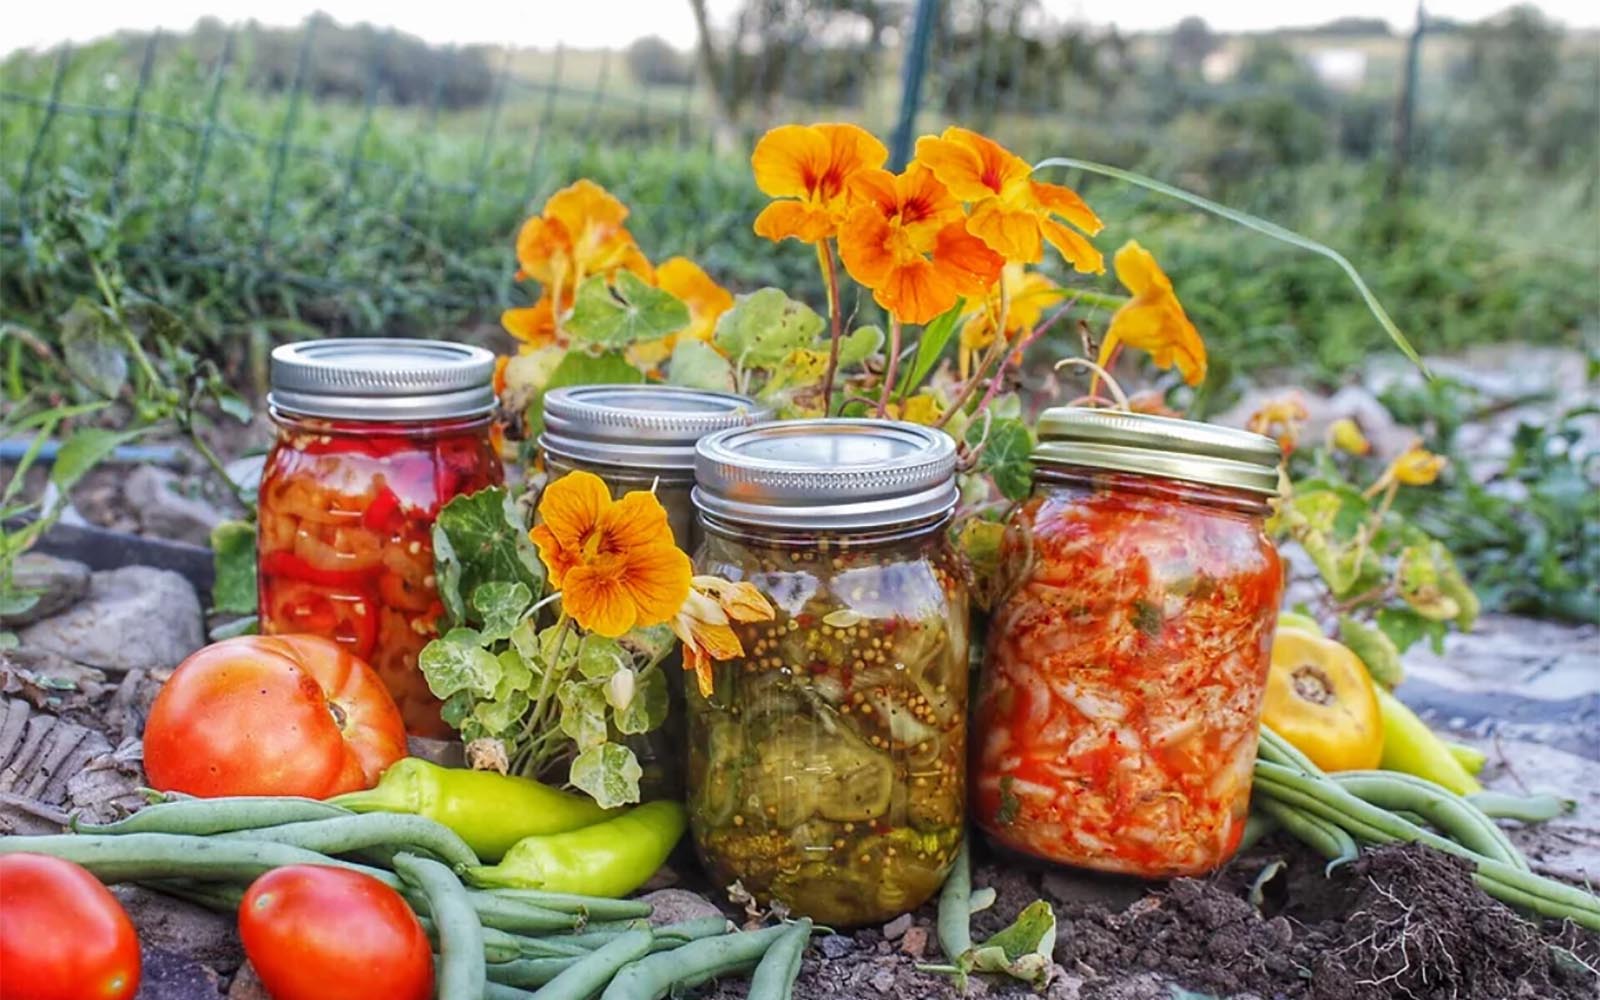 canning jars with pickled items surrounded by tomatoes, peppers and beans with a landscape background and some flowers